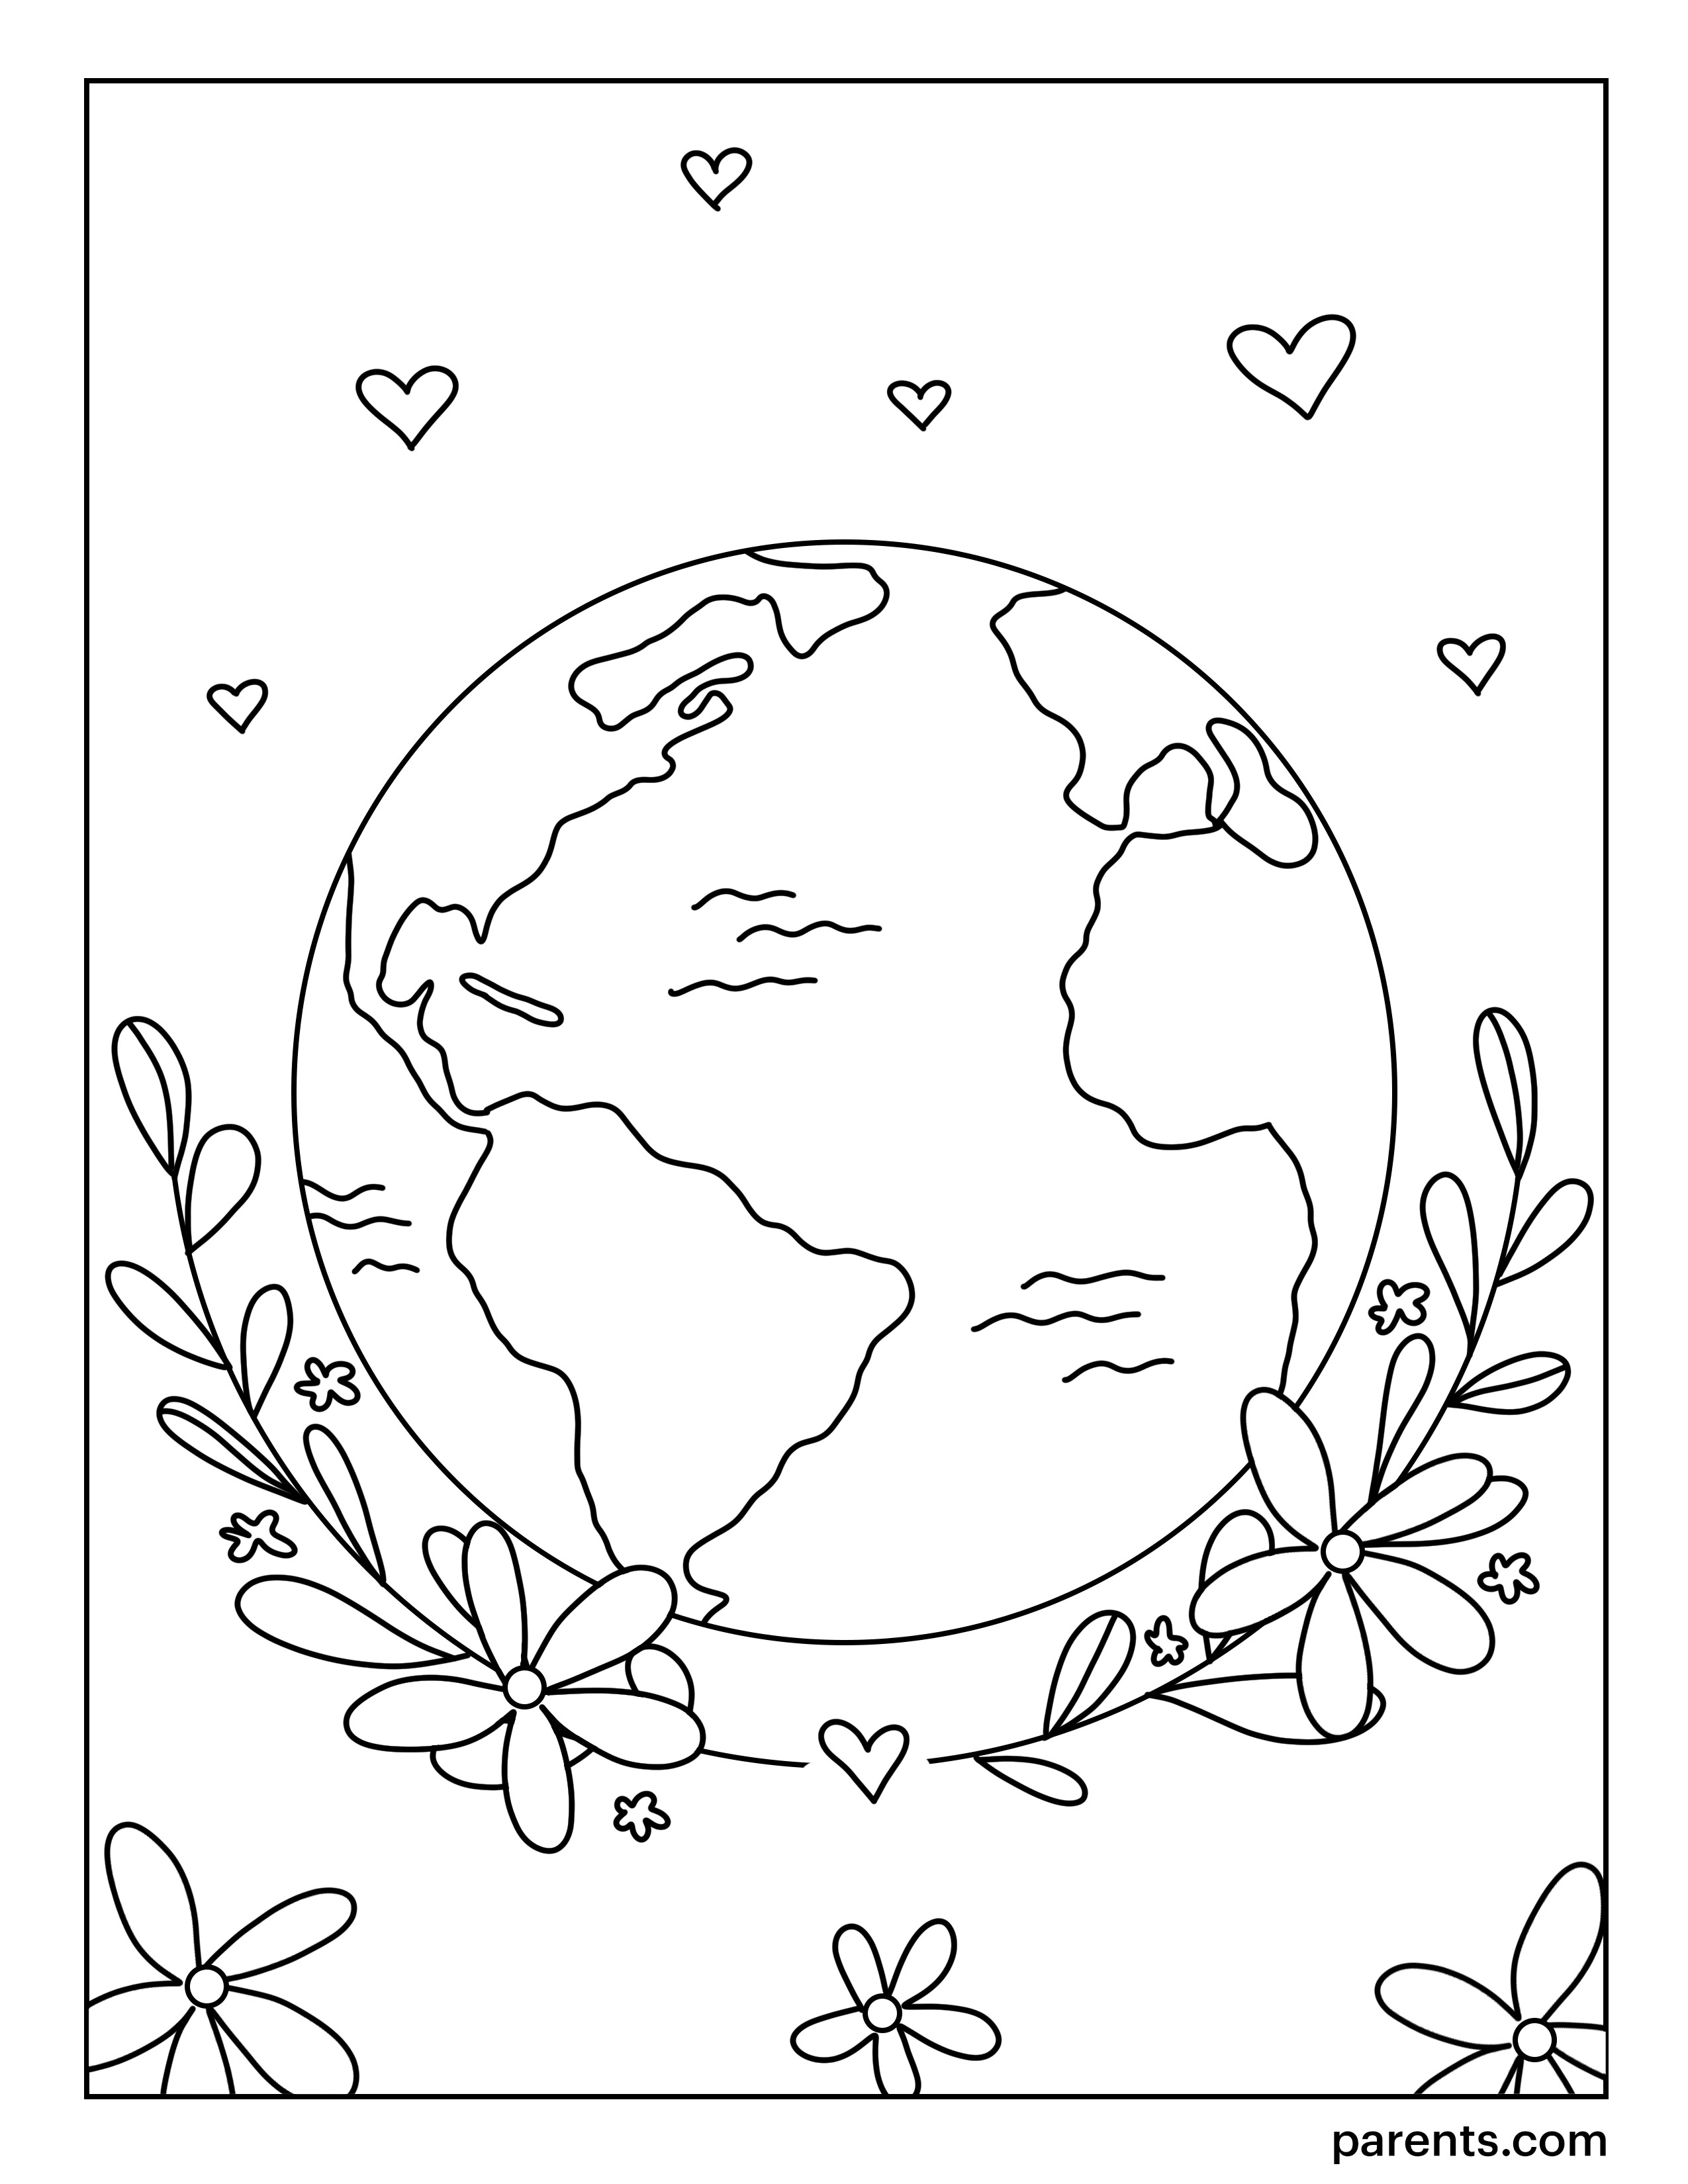 20 Free Earth Day Coloring Pages For Kids   Parents   Coloring Home